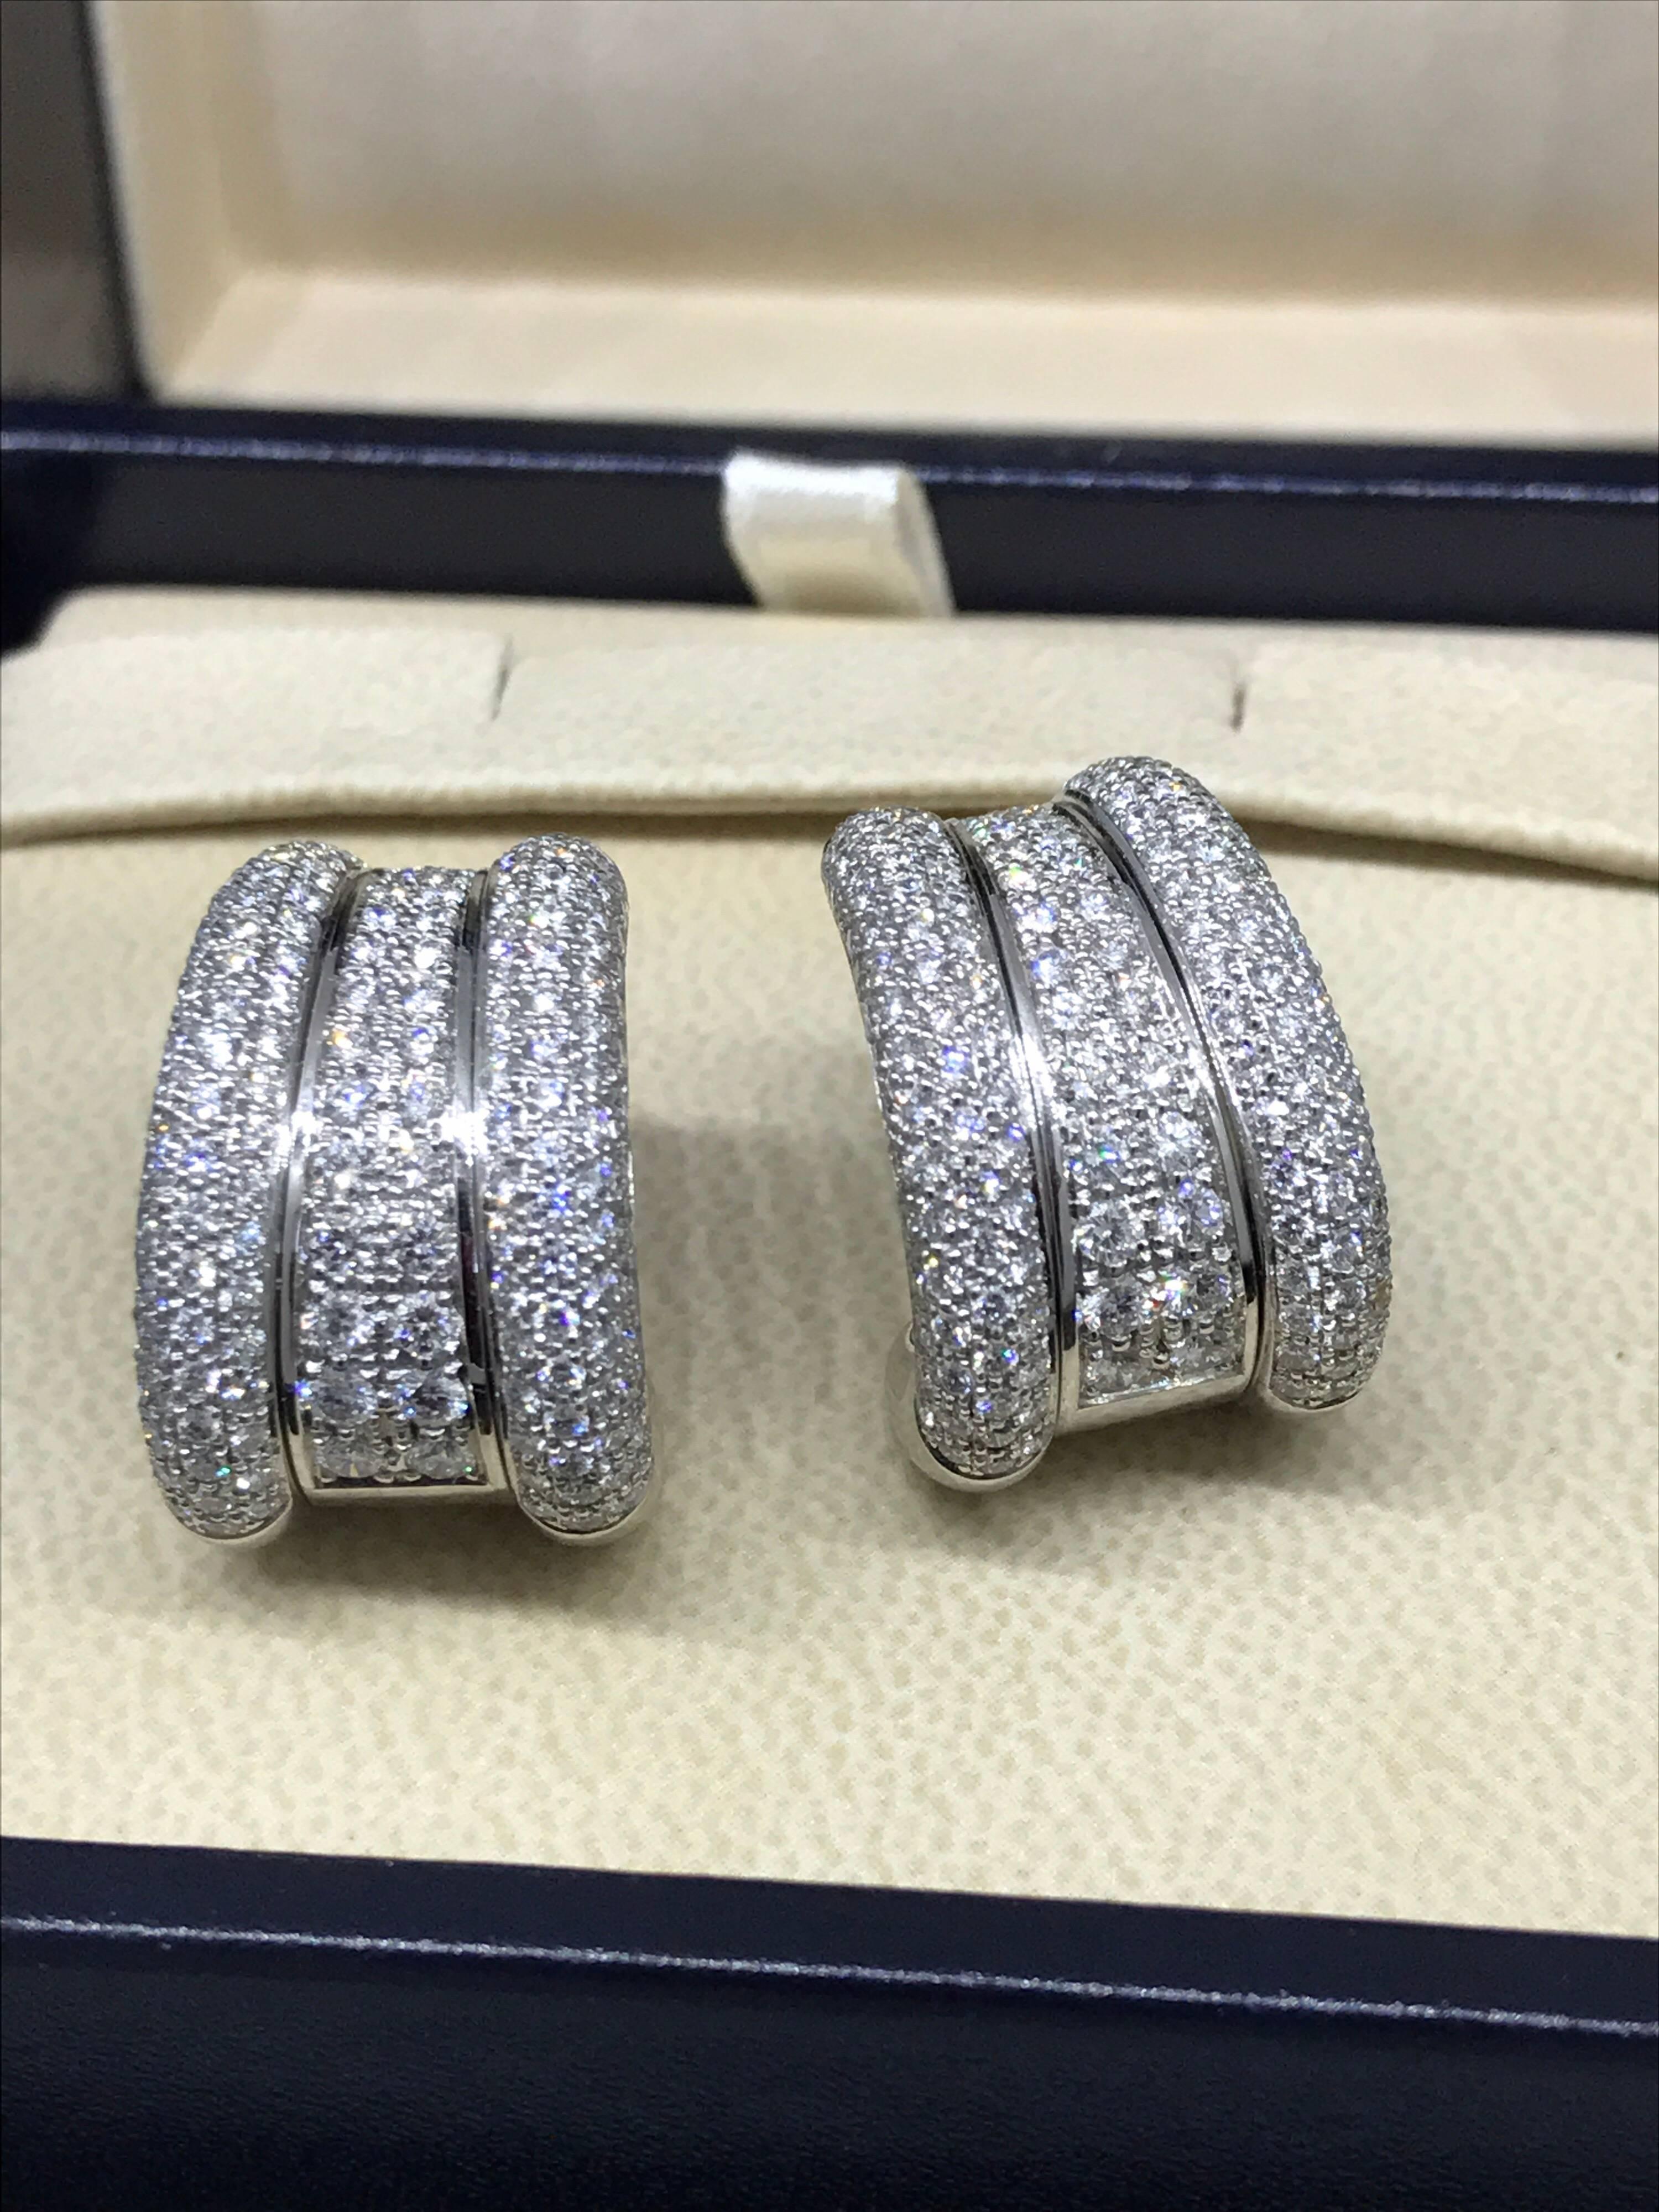 Chopard La Strada Earrings

Model Number: 84/4398-41

100% Authentic

New (Old Stock)

Comes with original Chopard box, certificate of authenticity and warranty, and jewels manual

18 Karat White Gold (23.5gr)

Earrings set with 338 Diamonds Total